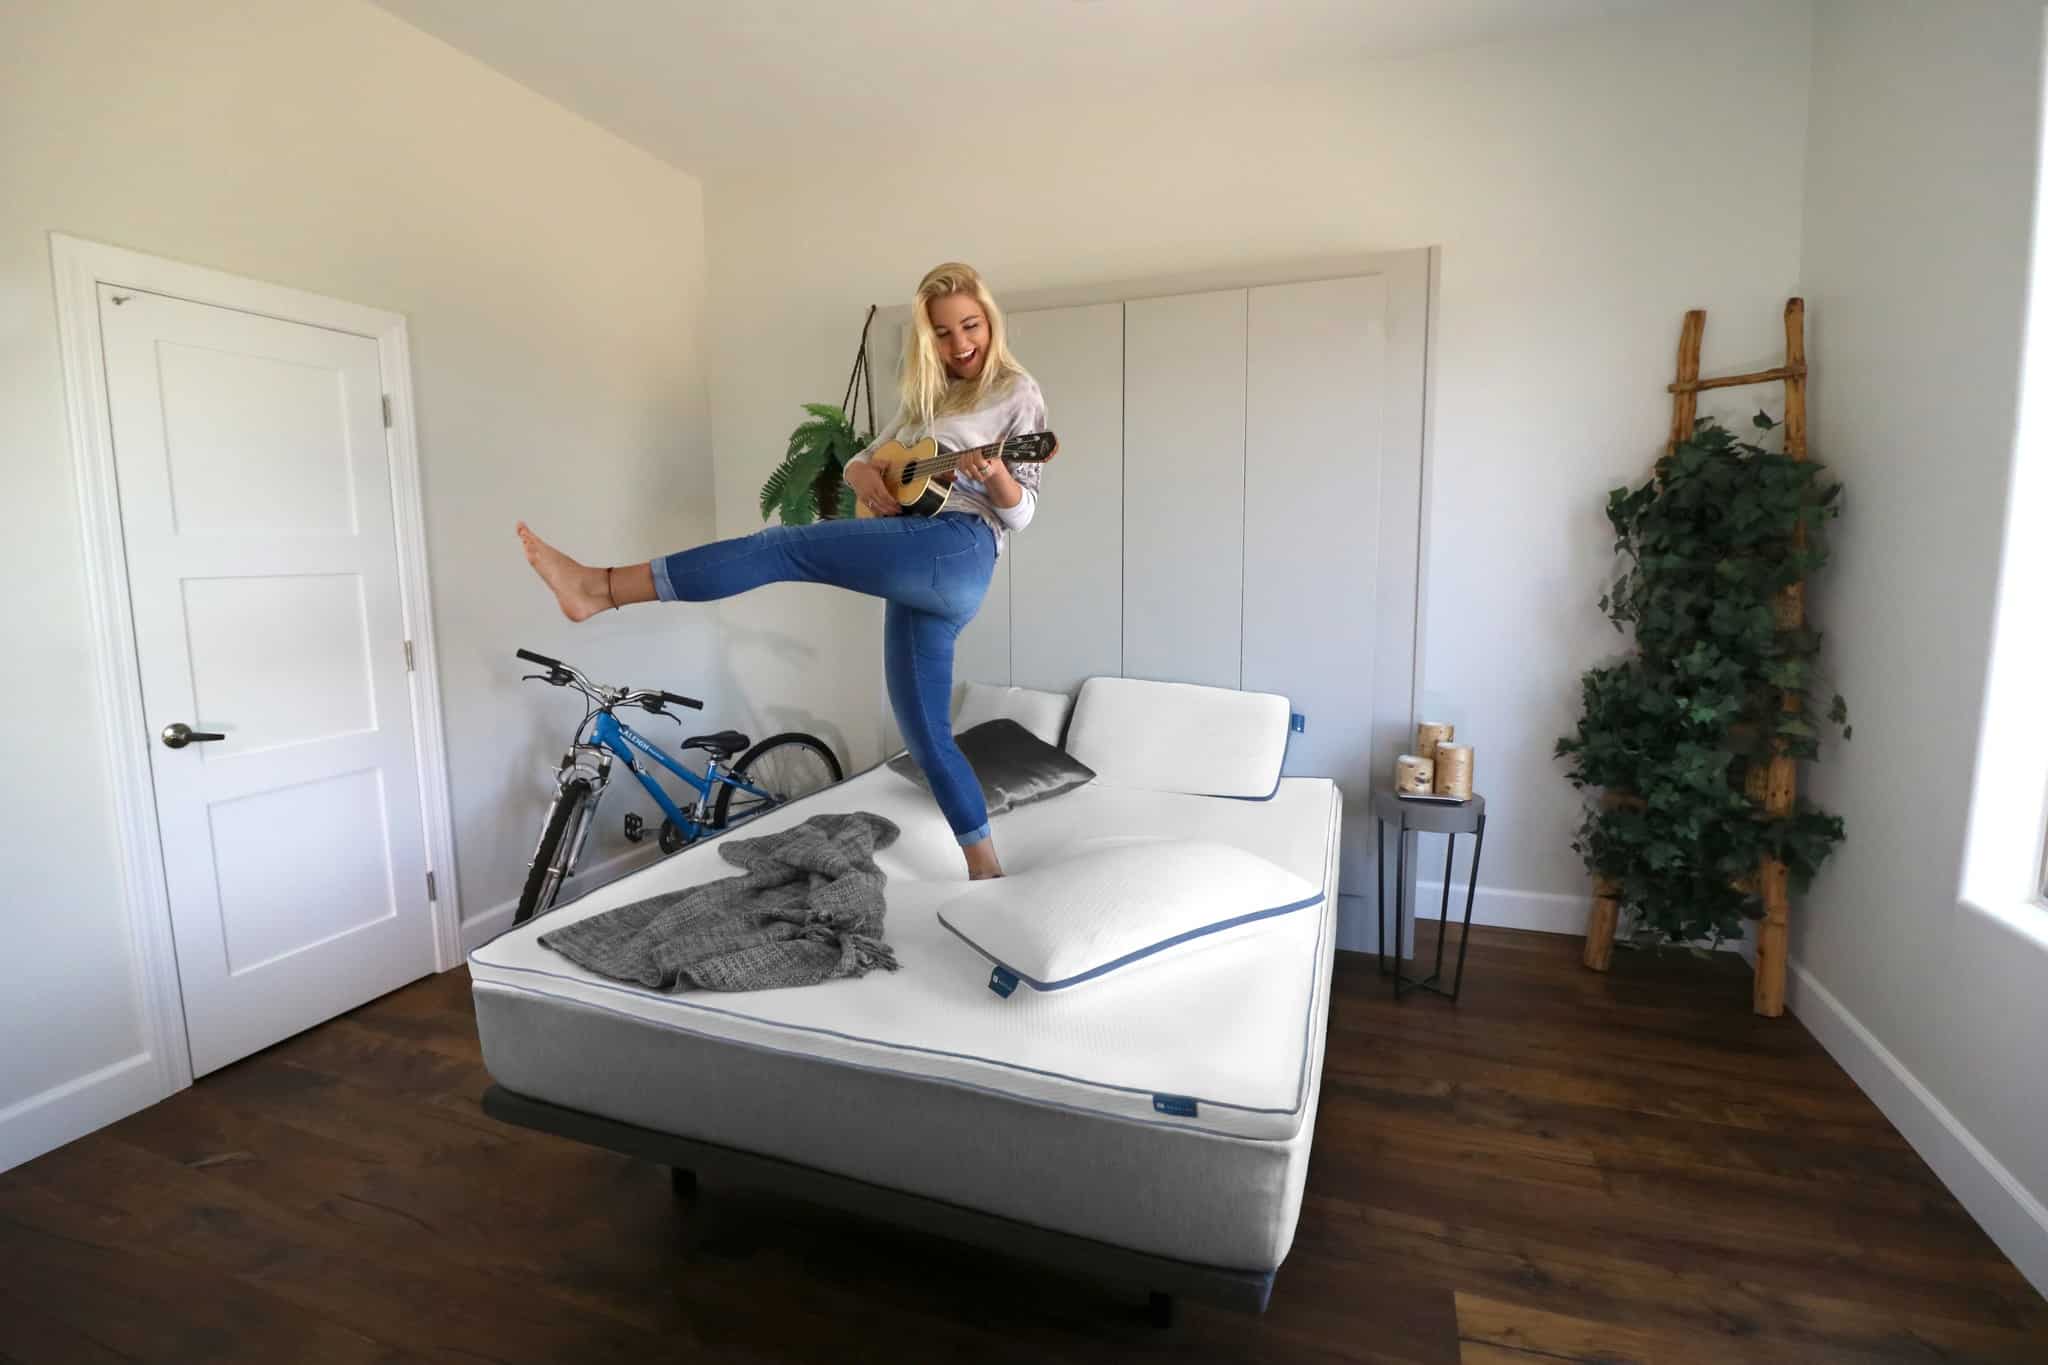 A woman dancing and playing a ukelele on the most durable mattress from Naturally Nestled